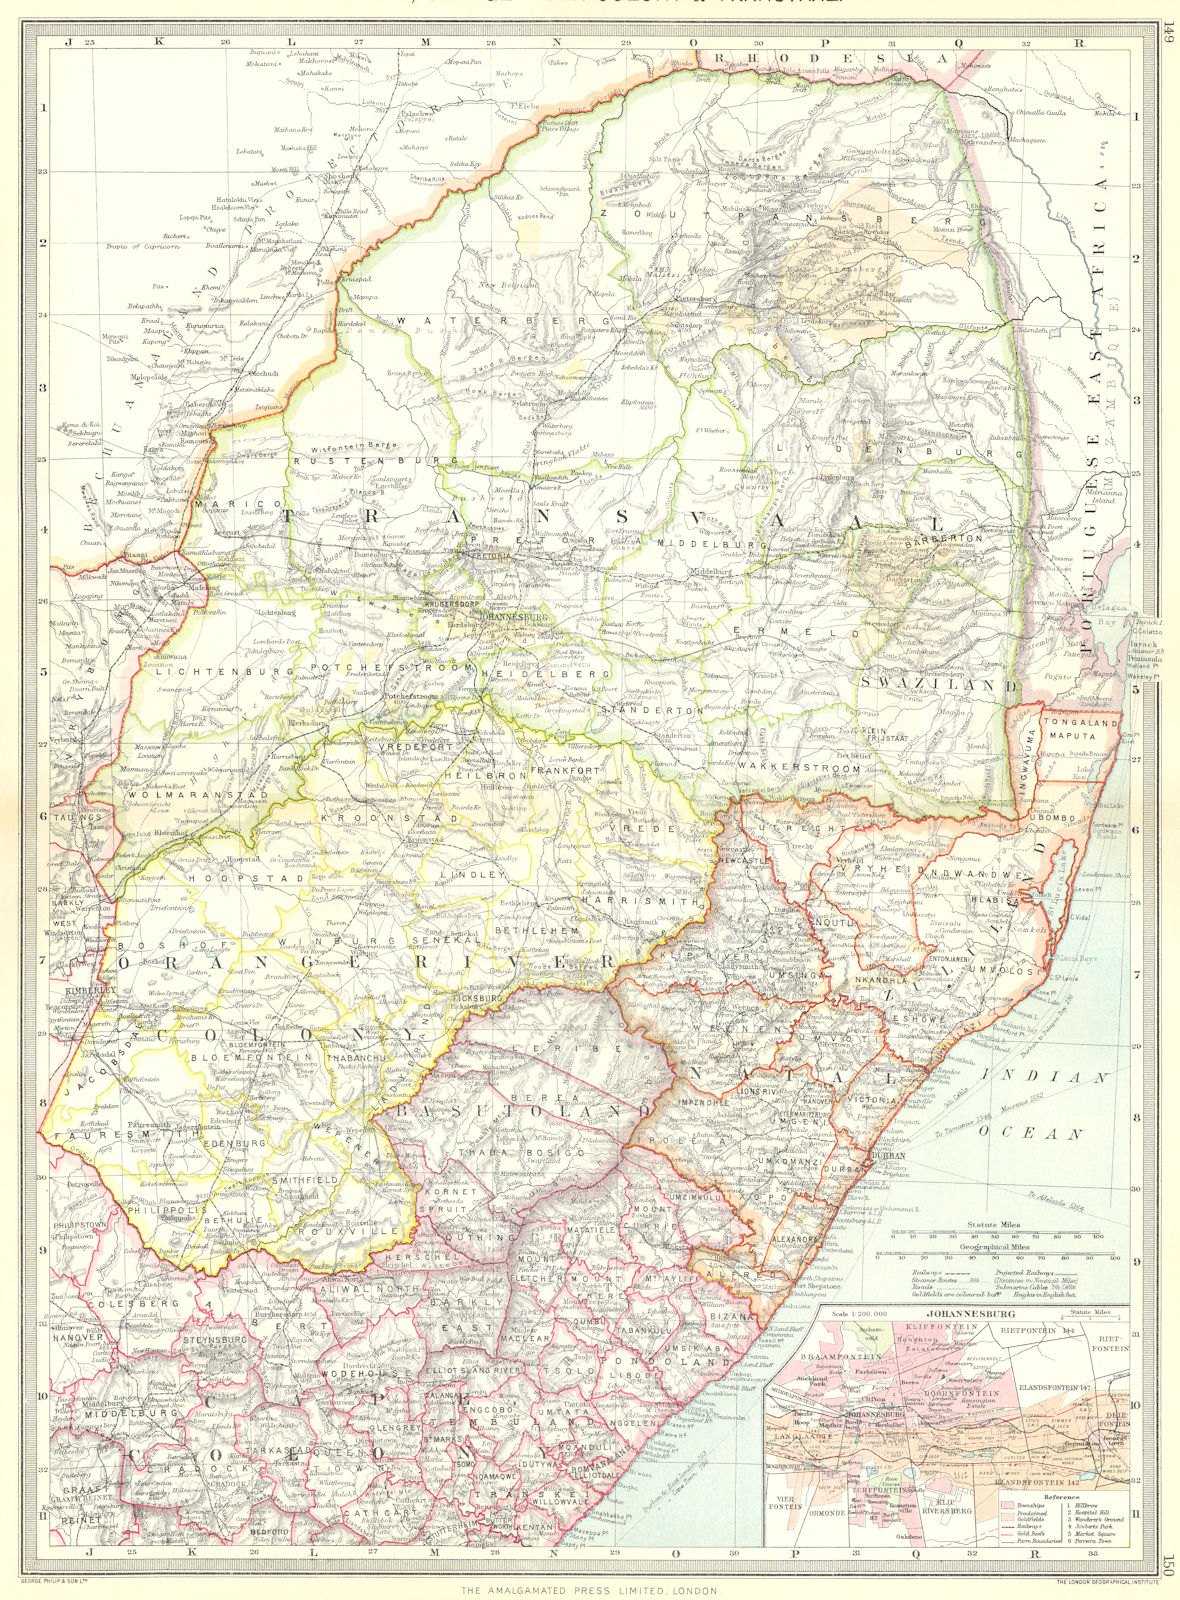 SOUTH AFRICA. Natal, Orange river Colony & Transvaal; map of Johannesburg 1907